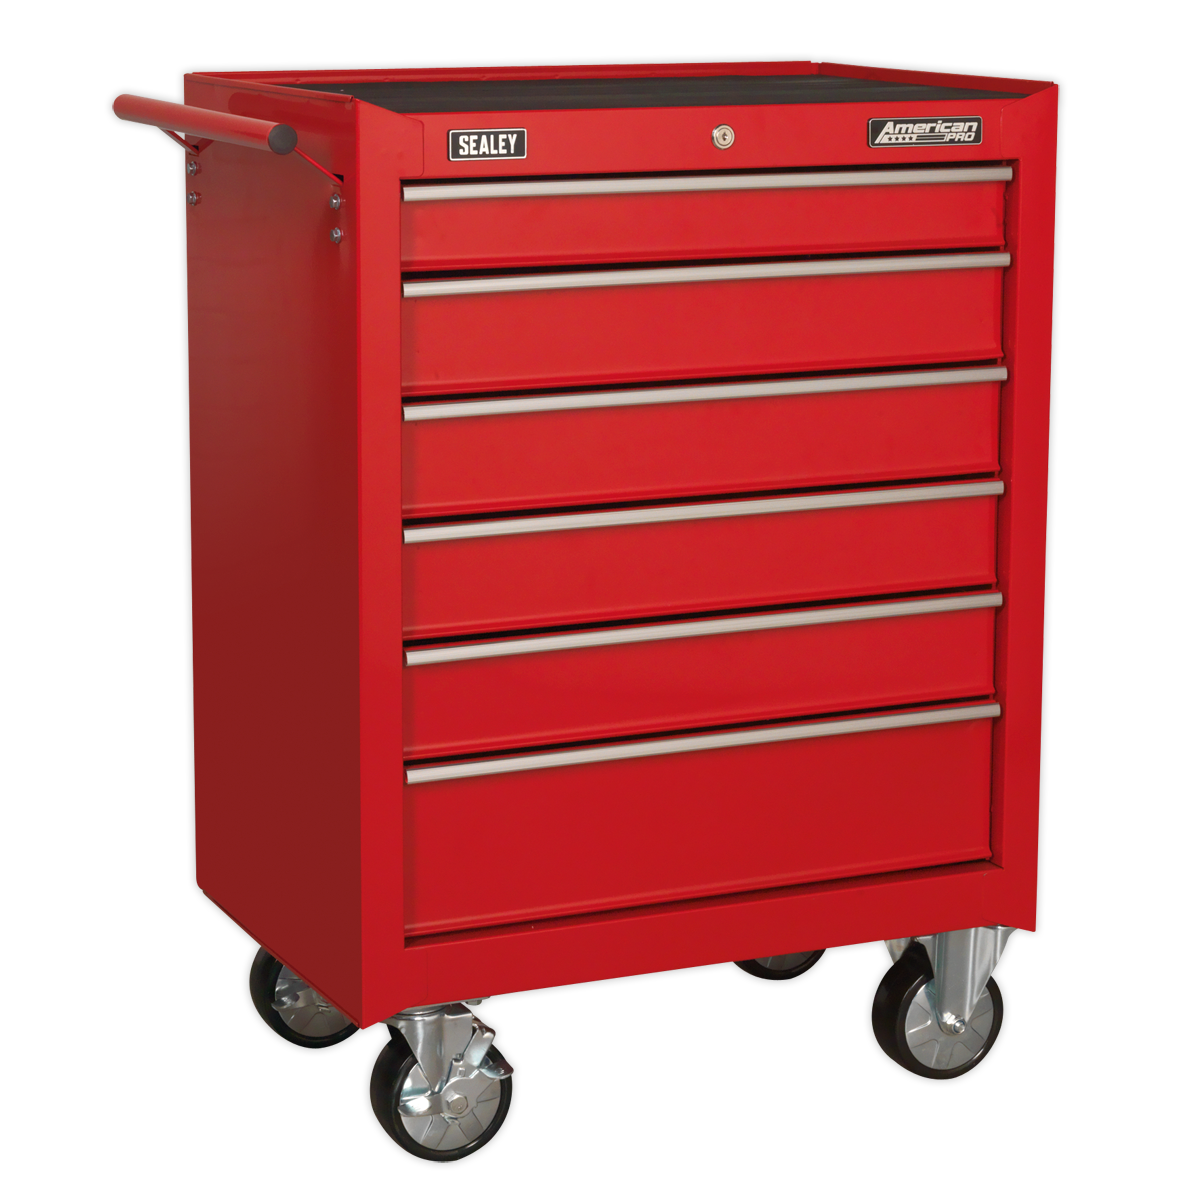 Sealey 6 Drawer Rollcab with Ball-Bearing Slides - Red AP226